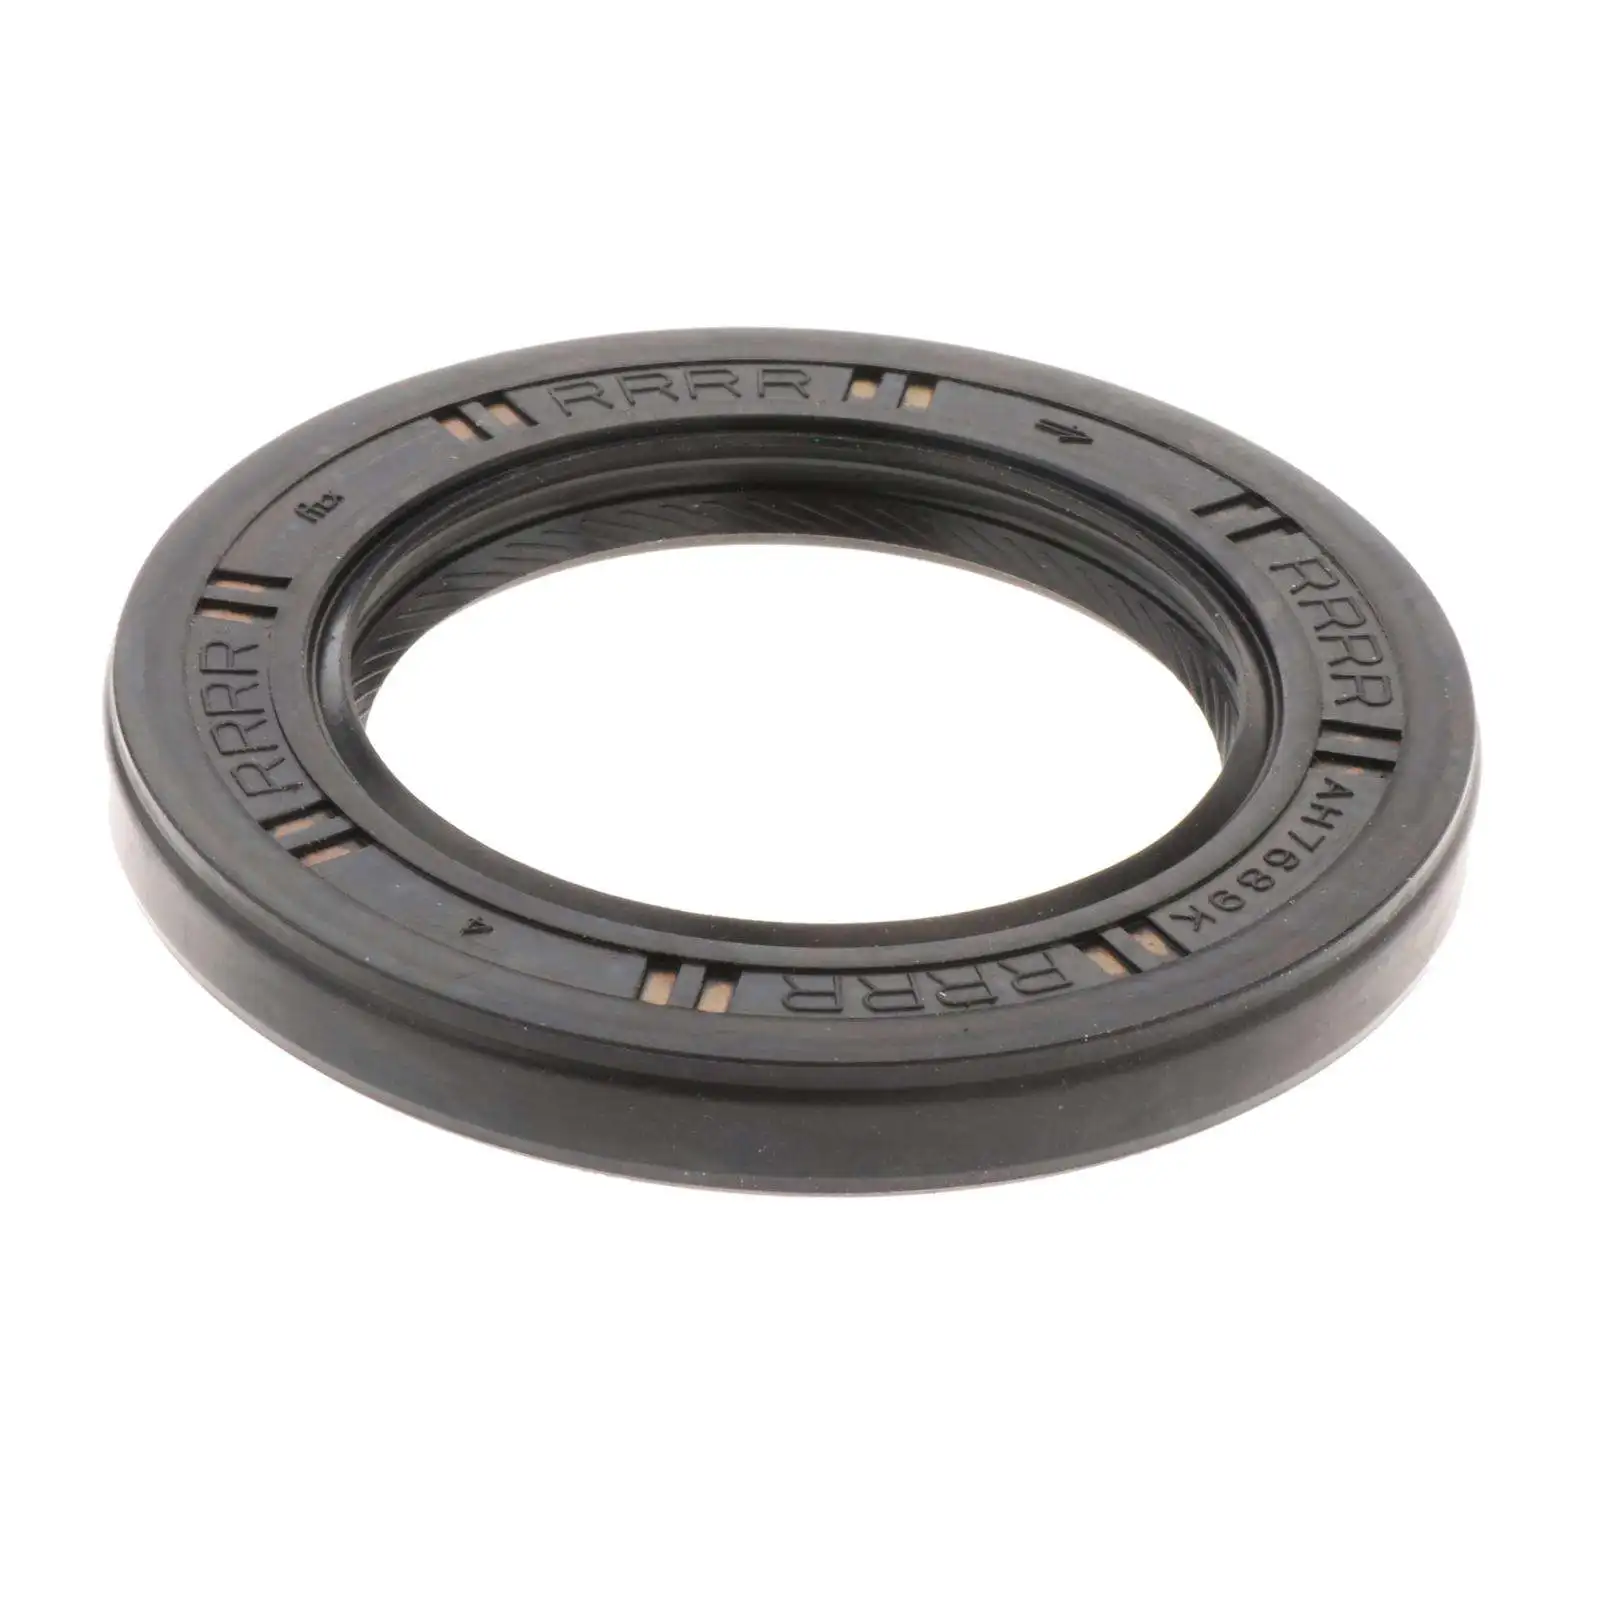 BCLA MFKA RE4 Front Oil Seal Rubber CVT Transmission Shaft Oil Seal for Honda for Accord Replaces 5SP Spare Parts